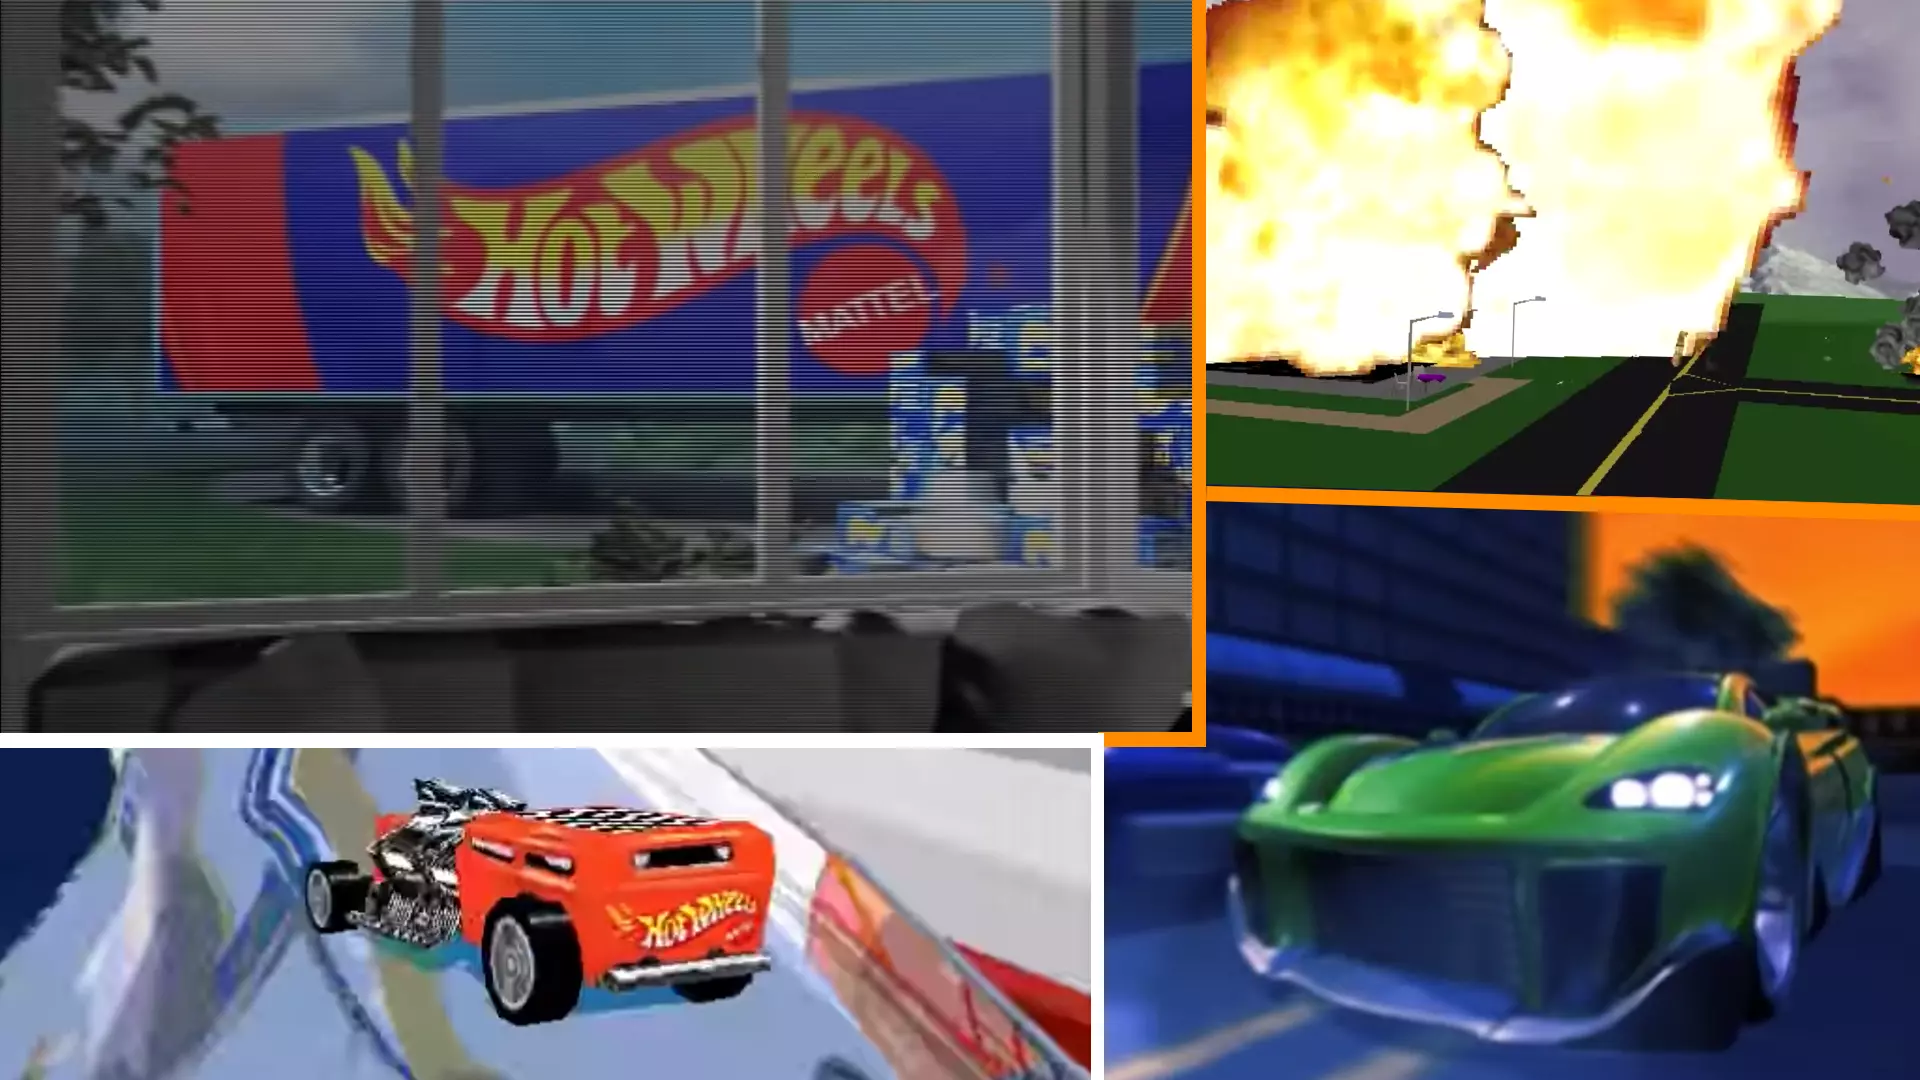 Hot Wheels Made Some Simple Video Games in the 2000s That I Still Think About | Autance